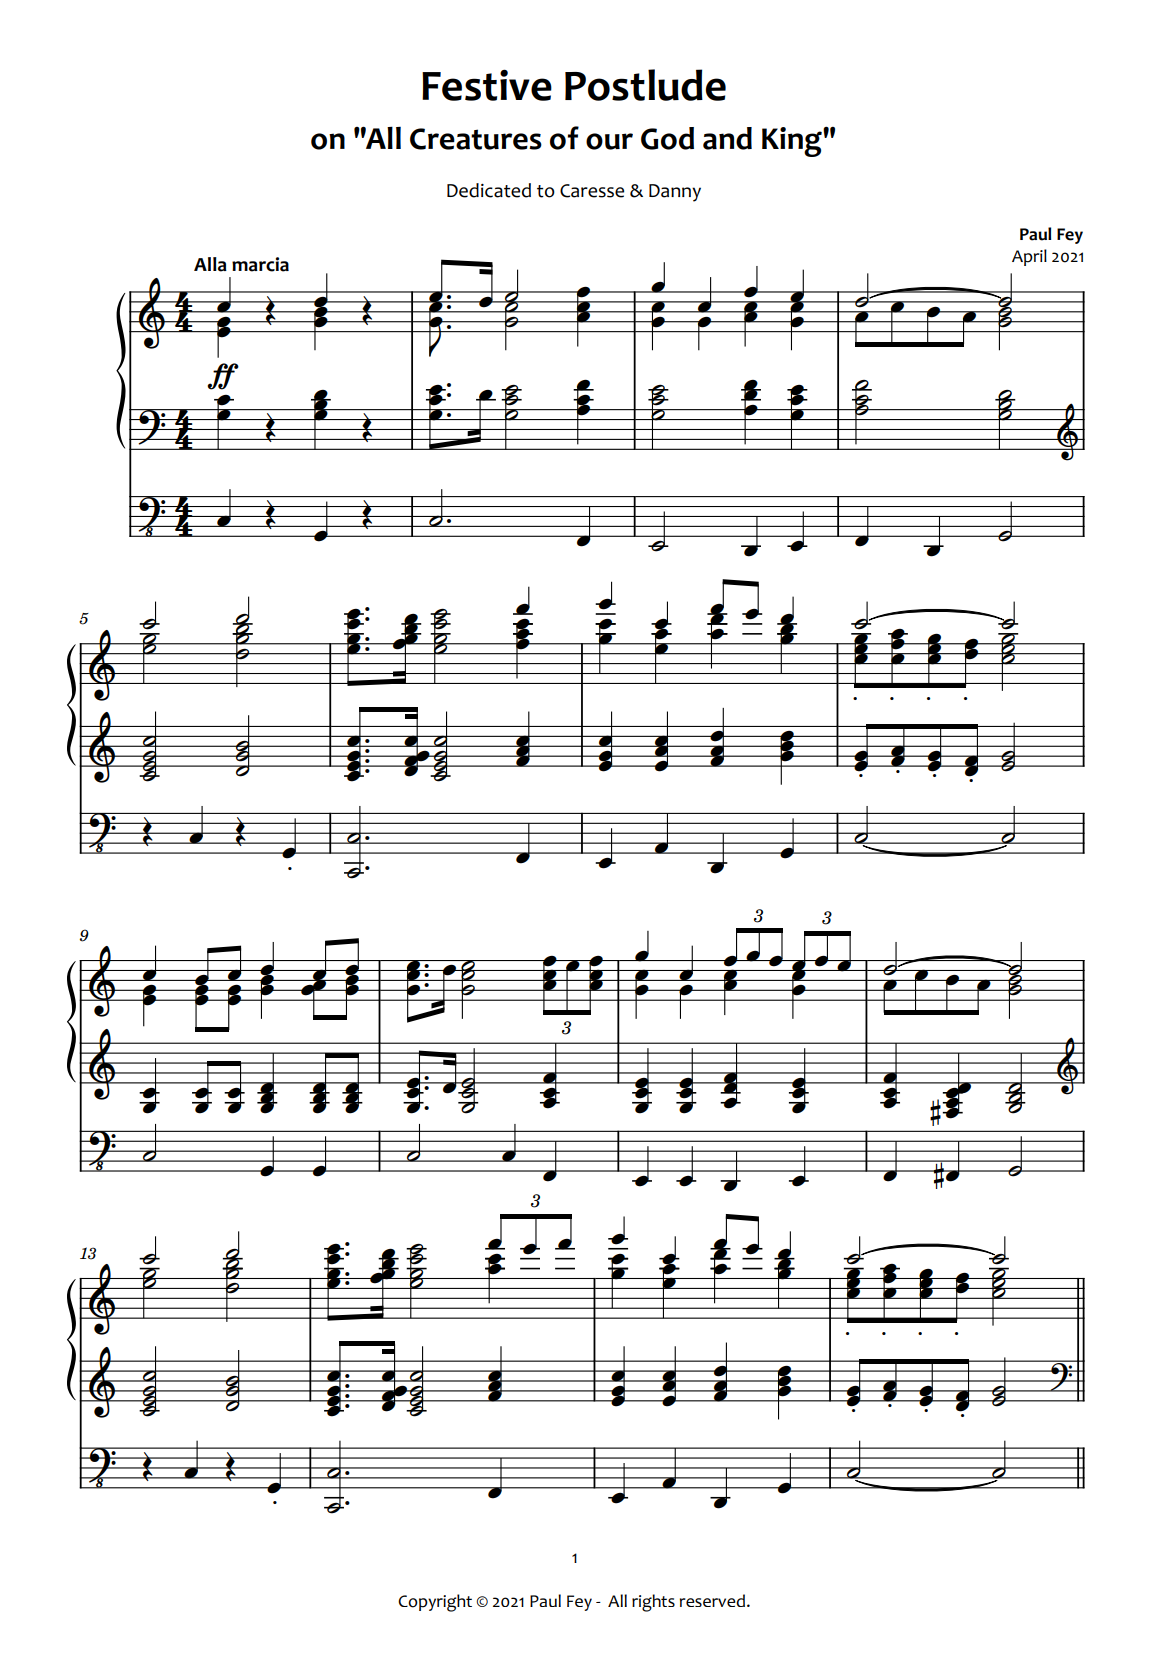 Festive Postlude on "All Creatures of Our God and King" (Sheet Music) for Organ